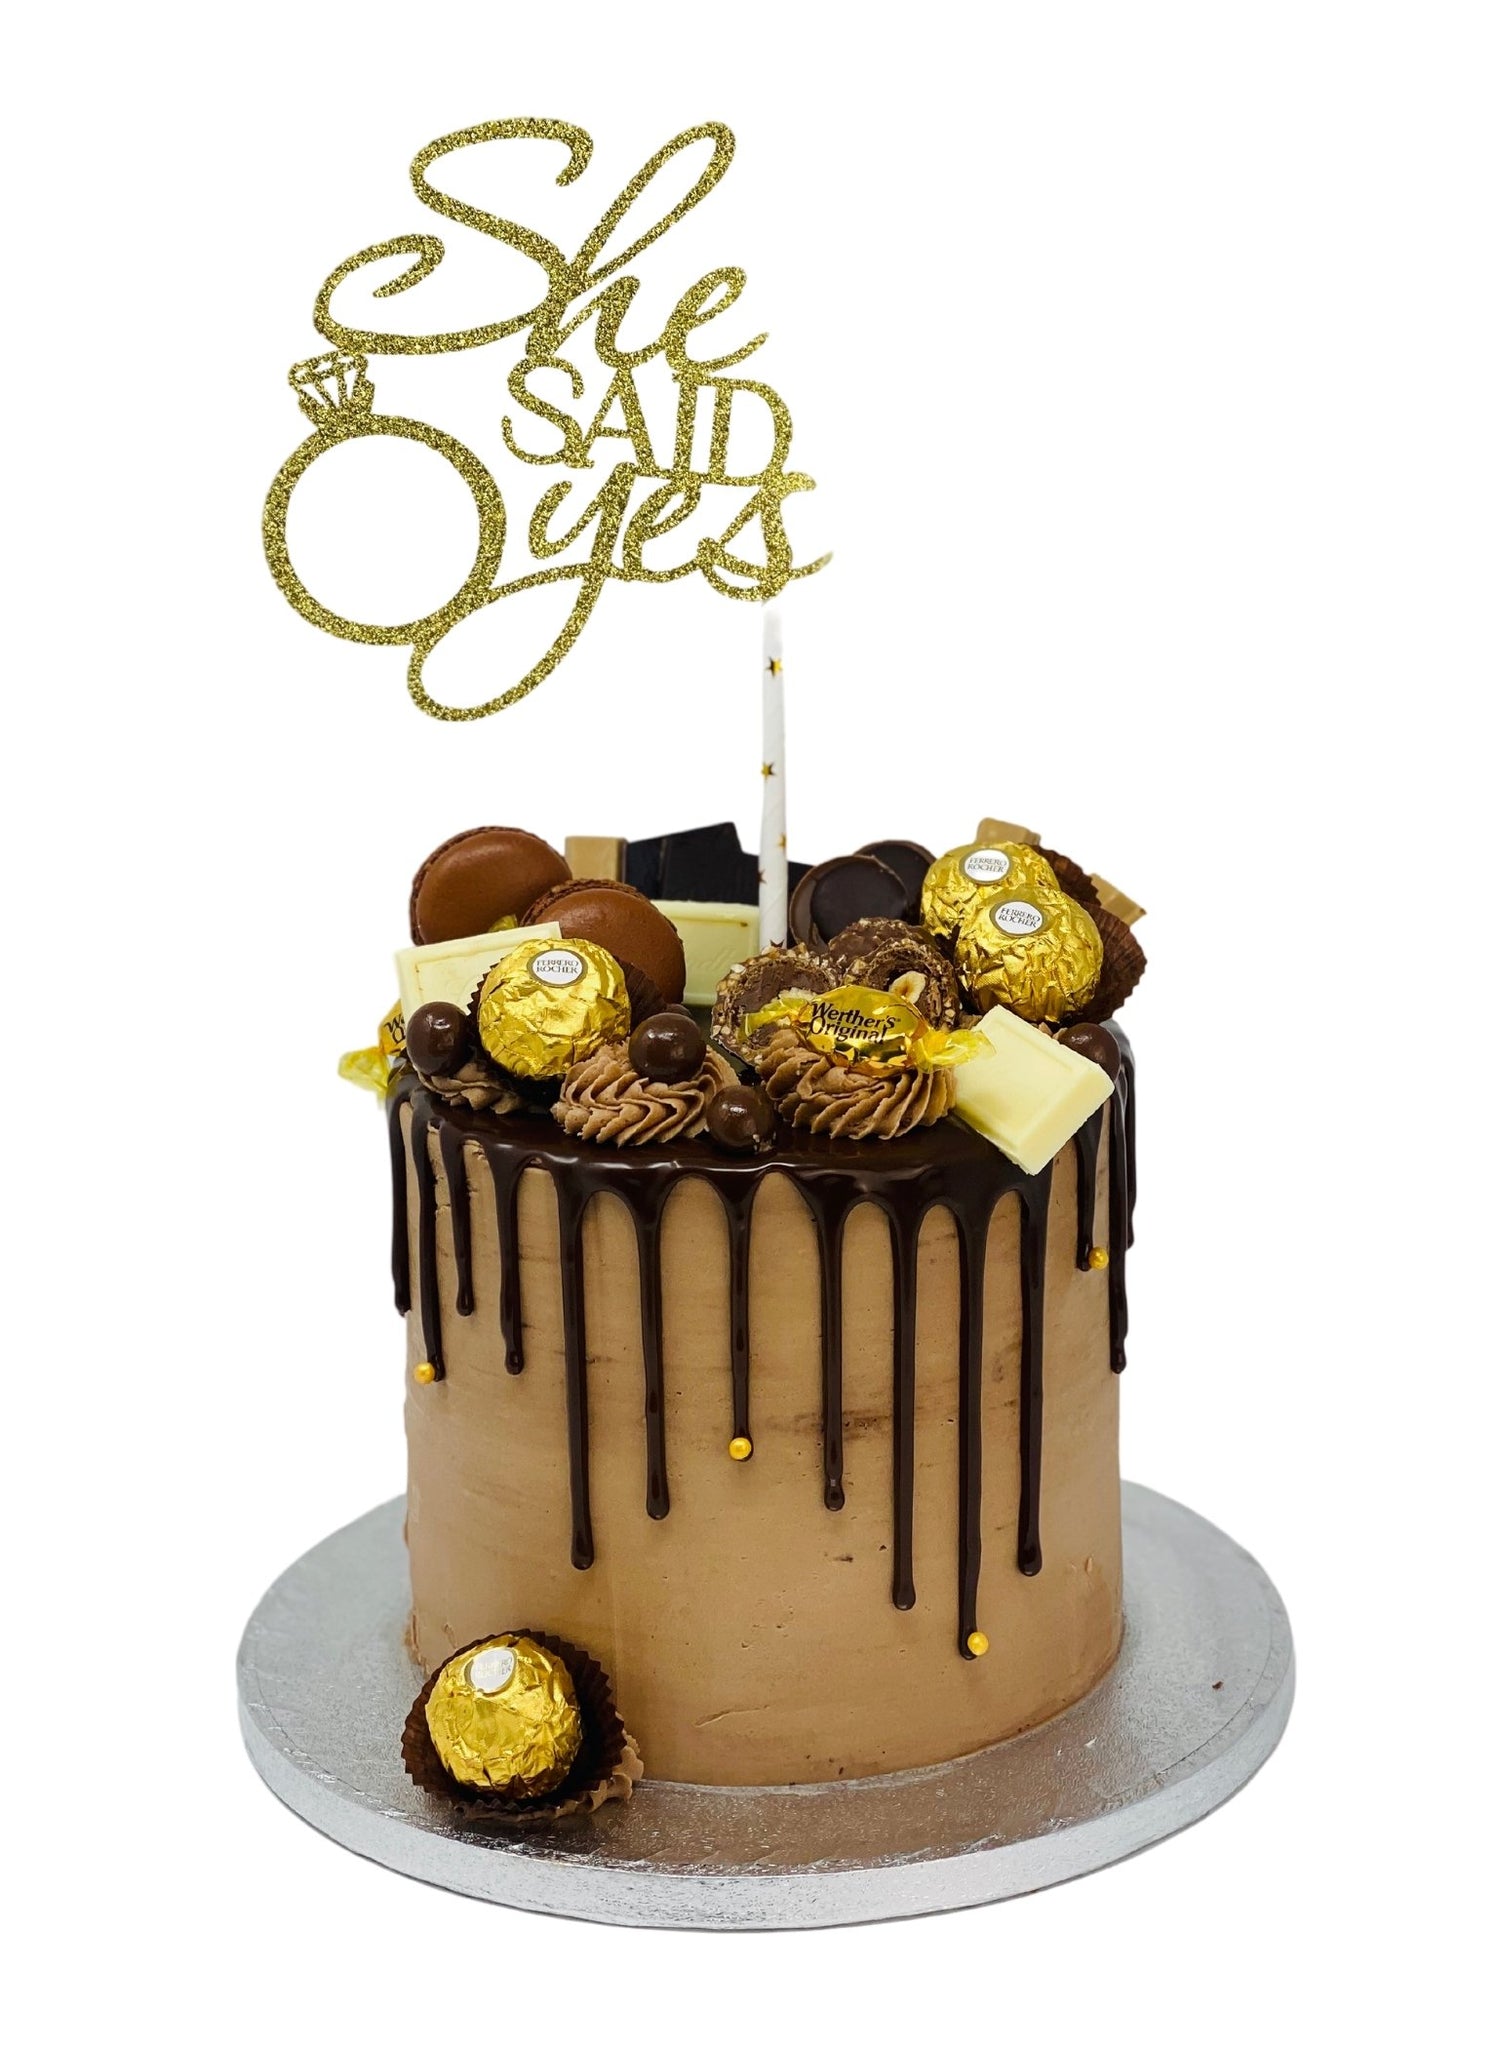 Sweet-Arts By Sare - A Ferrero Rocher & Toblerone Cake! - Chocolate Mud Cake  layers with a hazelnut Buttercream Frosting, crushed hazelnuts and  decorated with Ferrero Rochers, Toblerone and Maltesers. #cake  #cakesofinstagram #